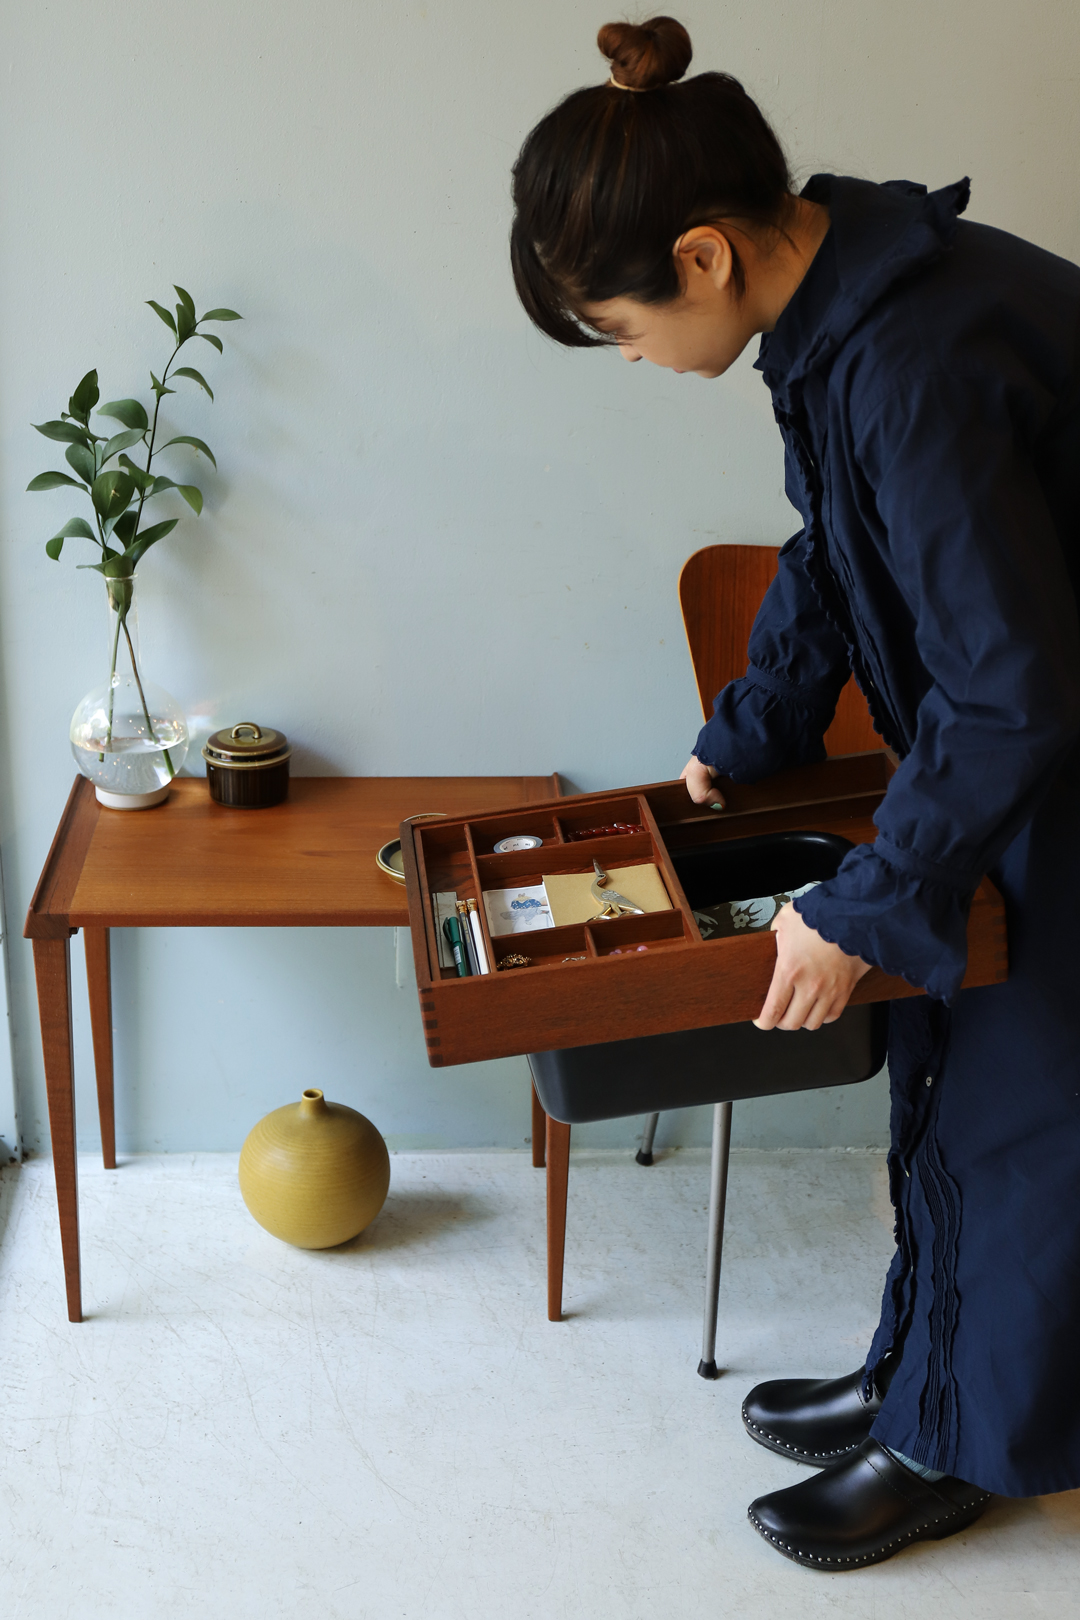 Danish Vintage Sewing Side Table/デンマークヴィンテージ ソーイングテーブル チーク材 モダンデザイン 北欧家具